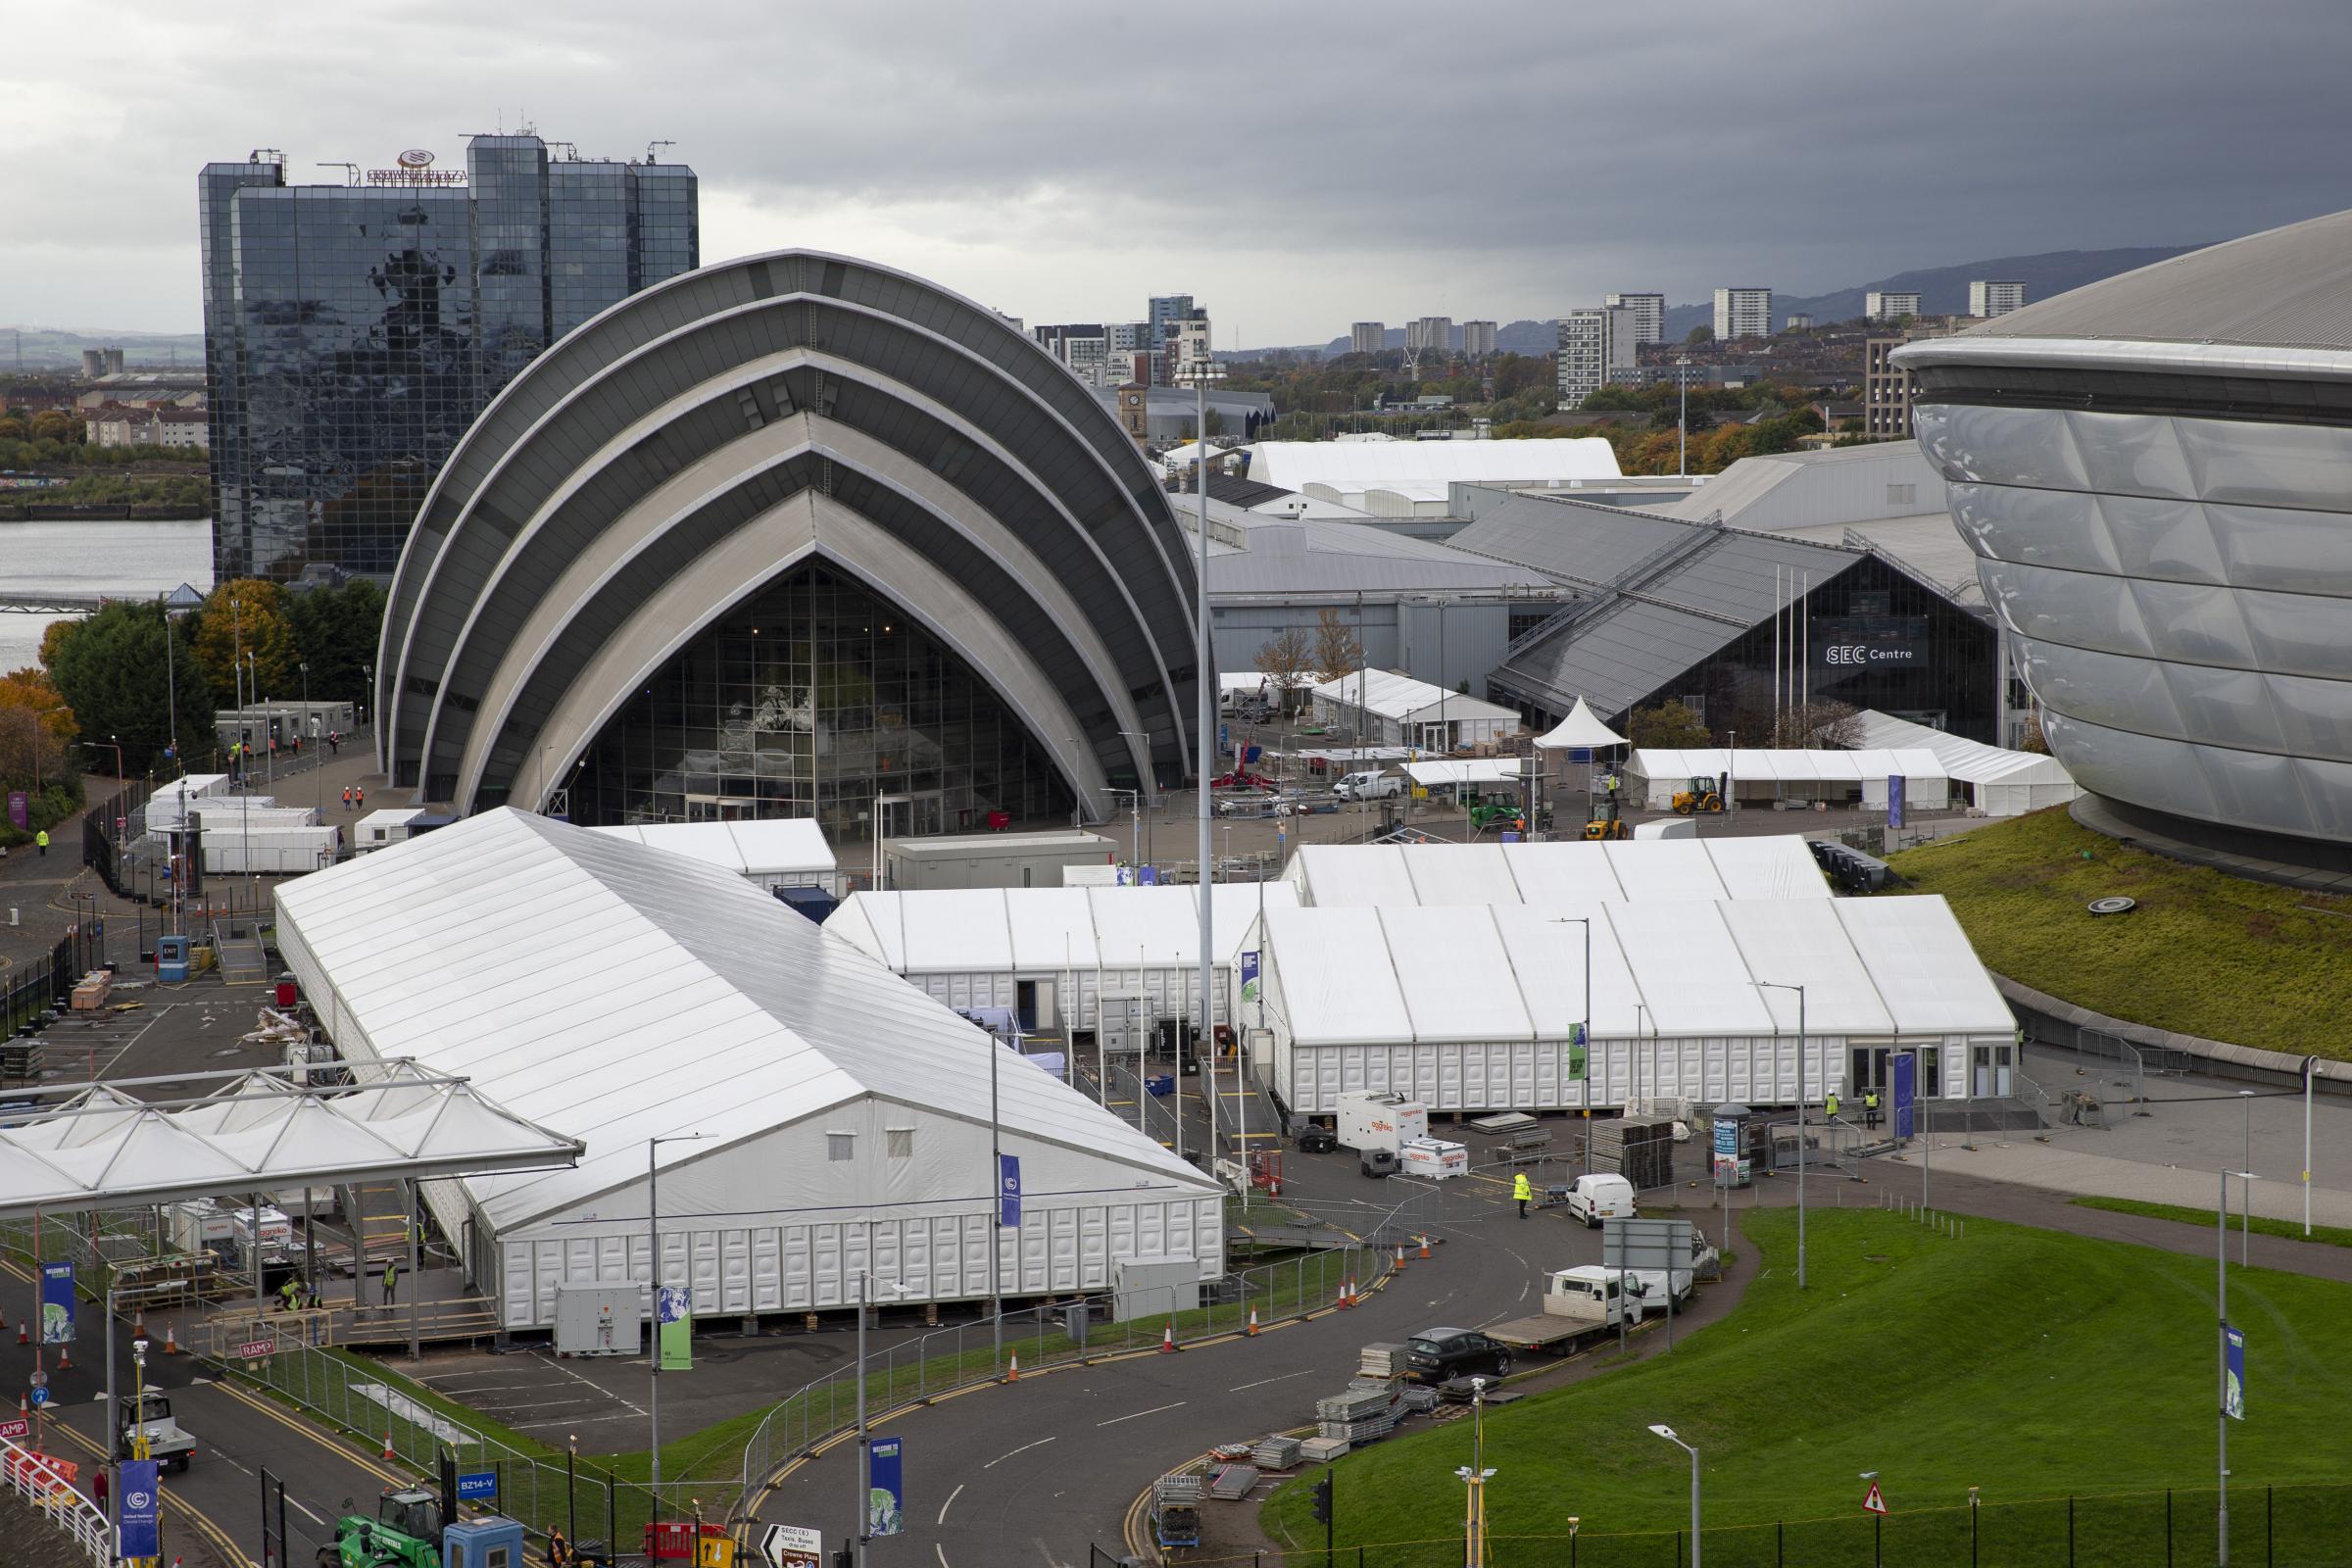 COP26: Improving security at Glasgows SEC was seen as priority after Manchester attack